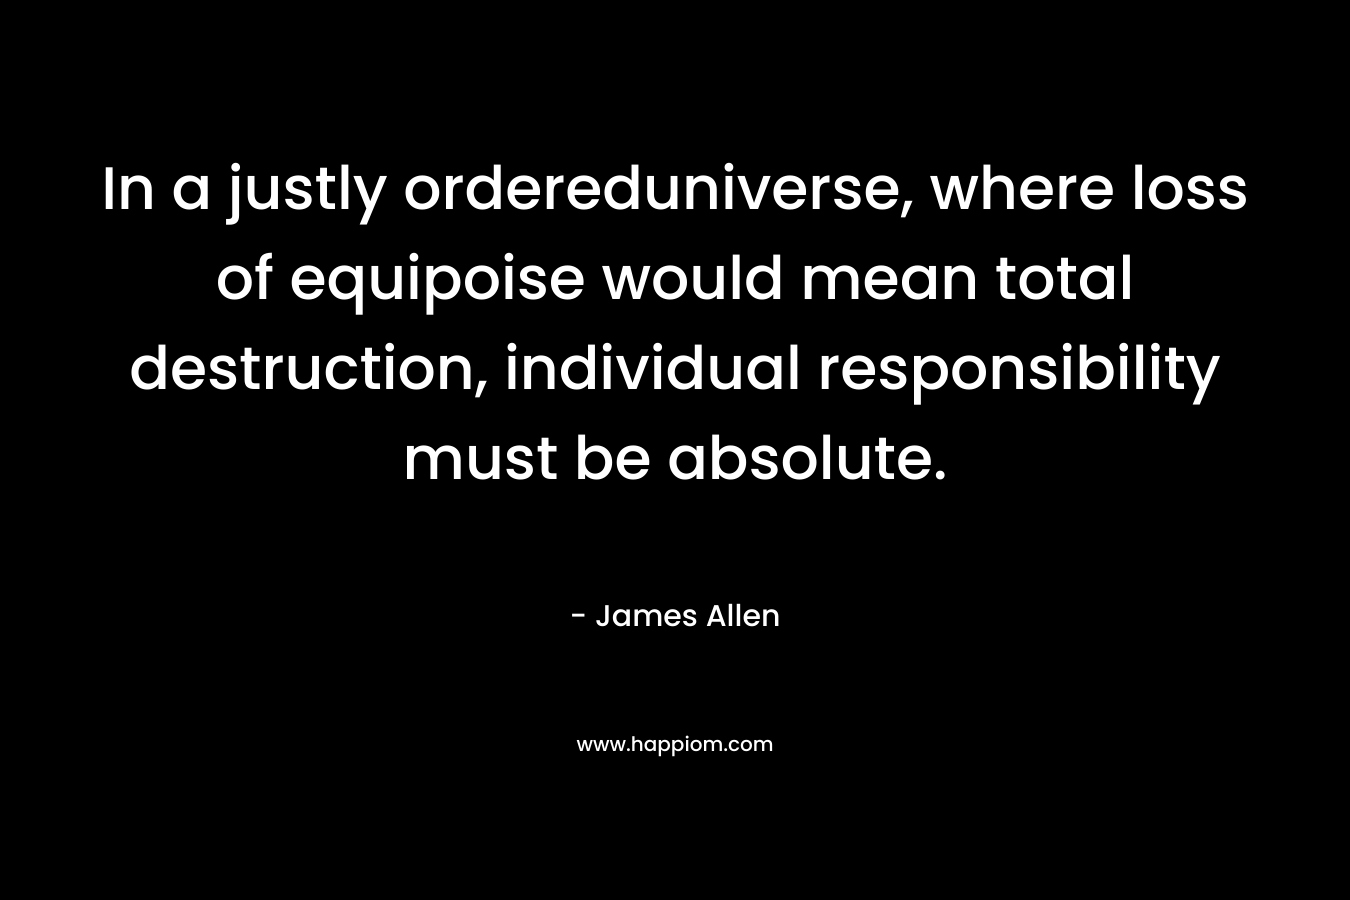 In a justly ordereduniverse, where loss of equipoise would mean total destruction, individual responsibility must be absolute.